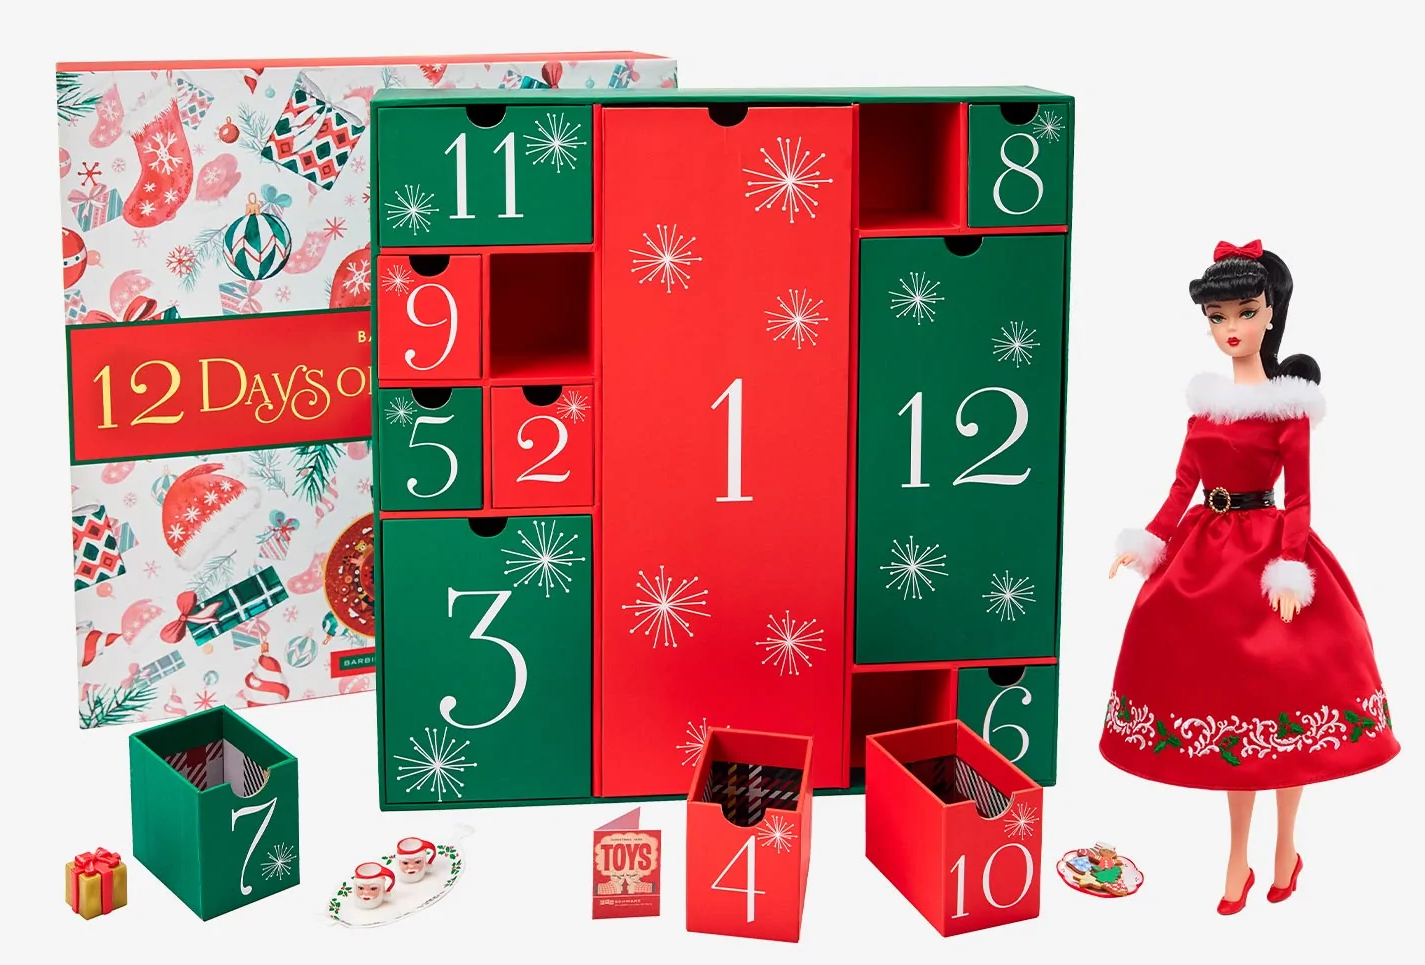 Barbie Advent Calendar 2022 - Barbie 12 Days of Christmas Doll and Accessories - YouLoveIt.com